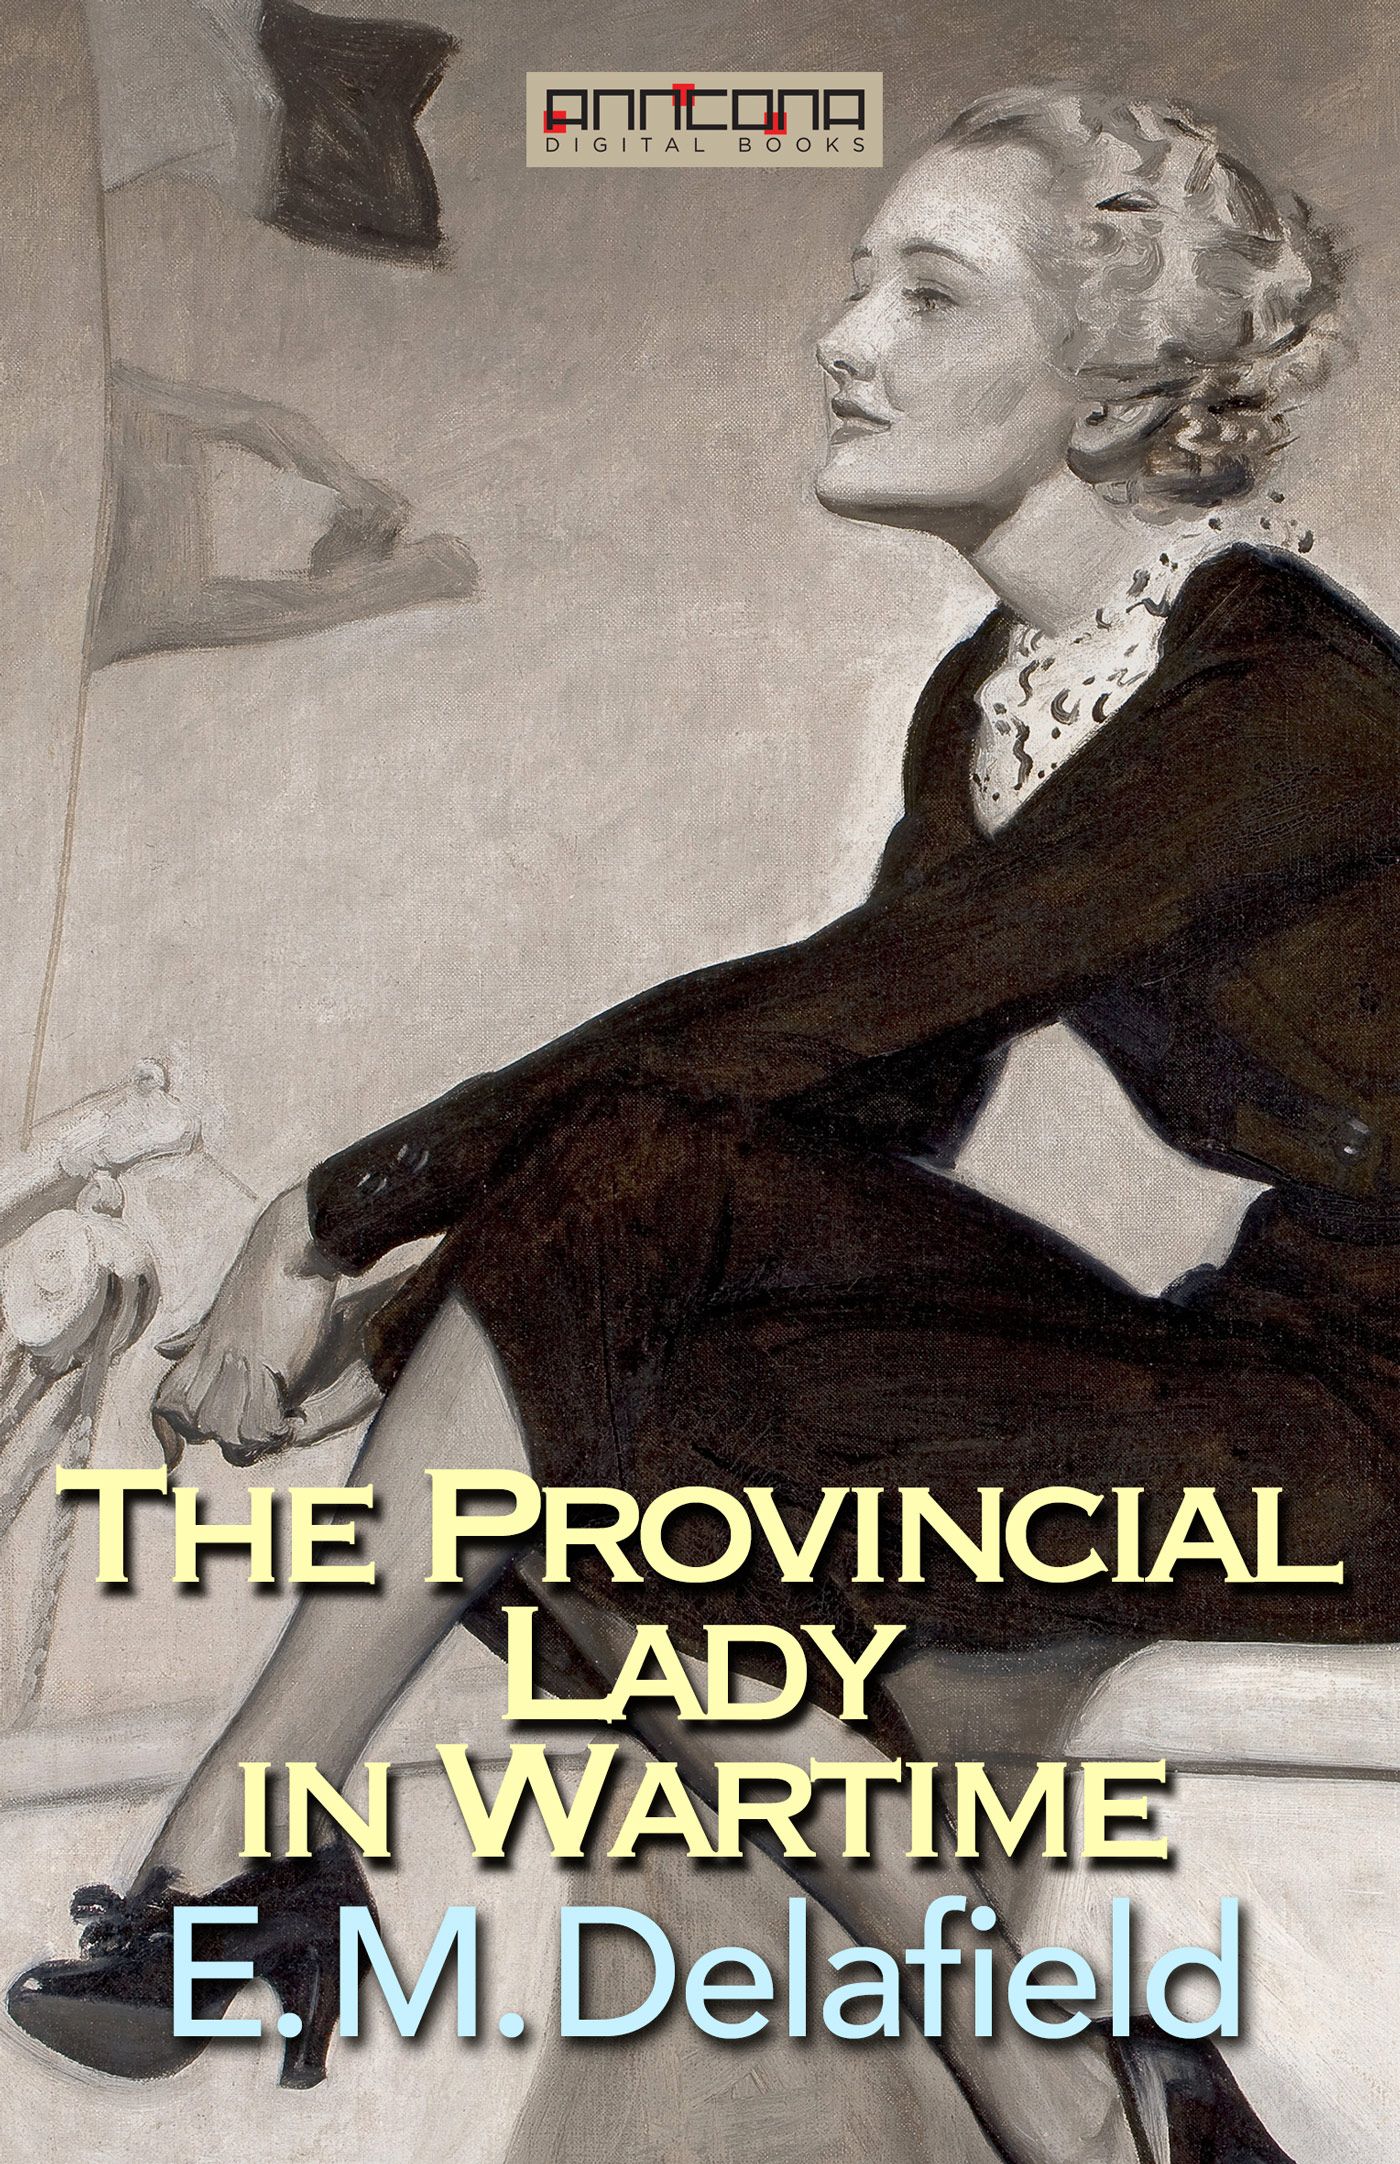 The Provincial Lady in Wartime, eBook by E. M. Delafield